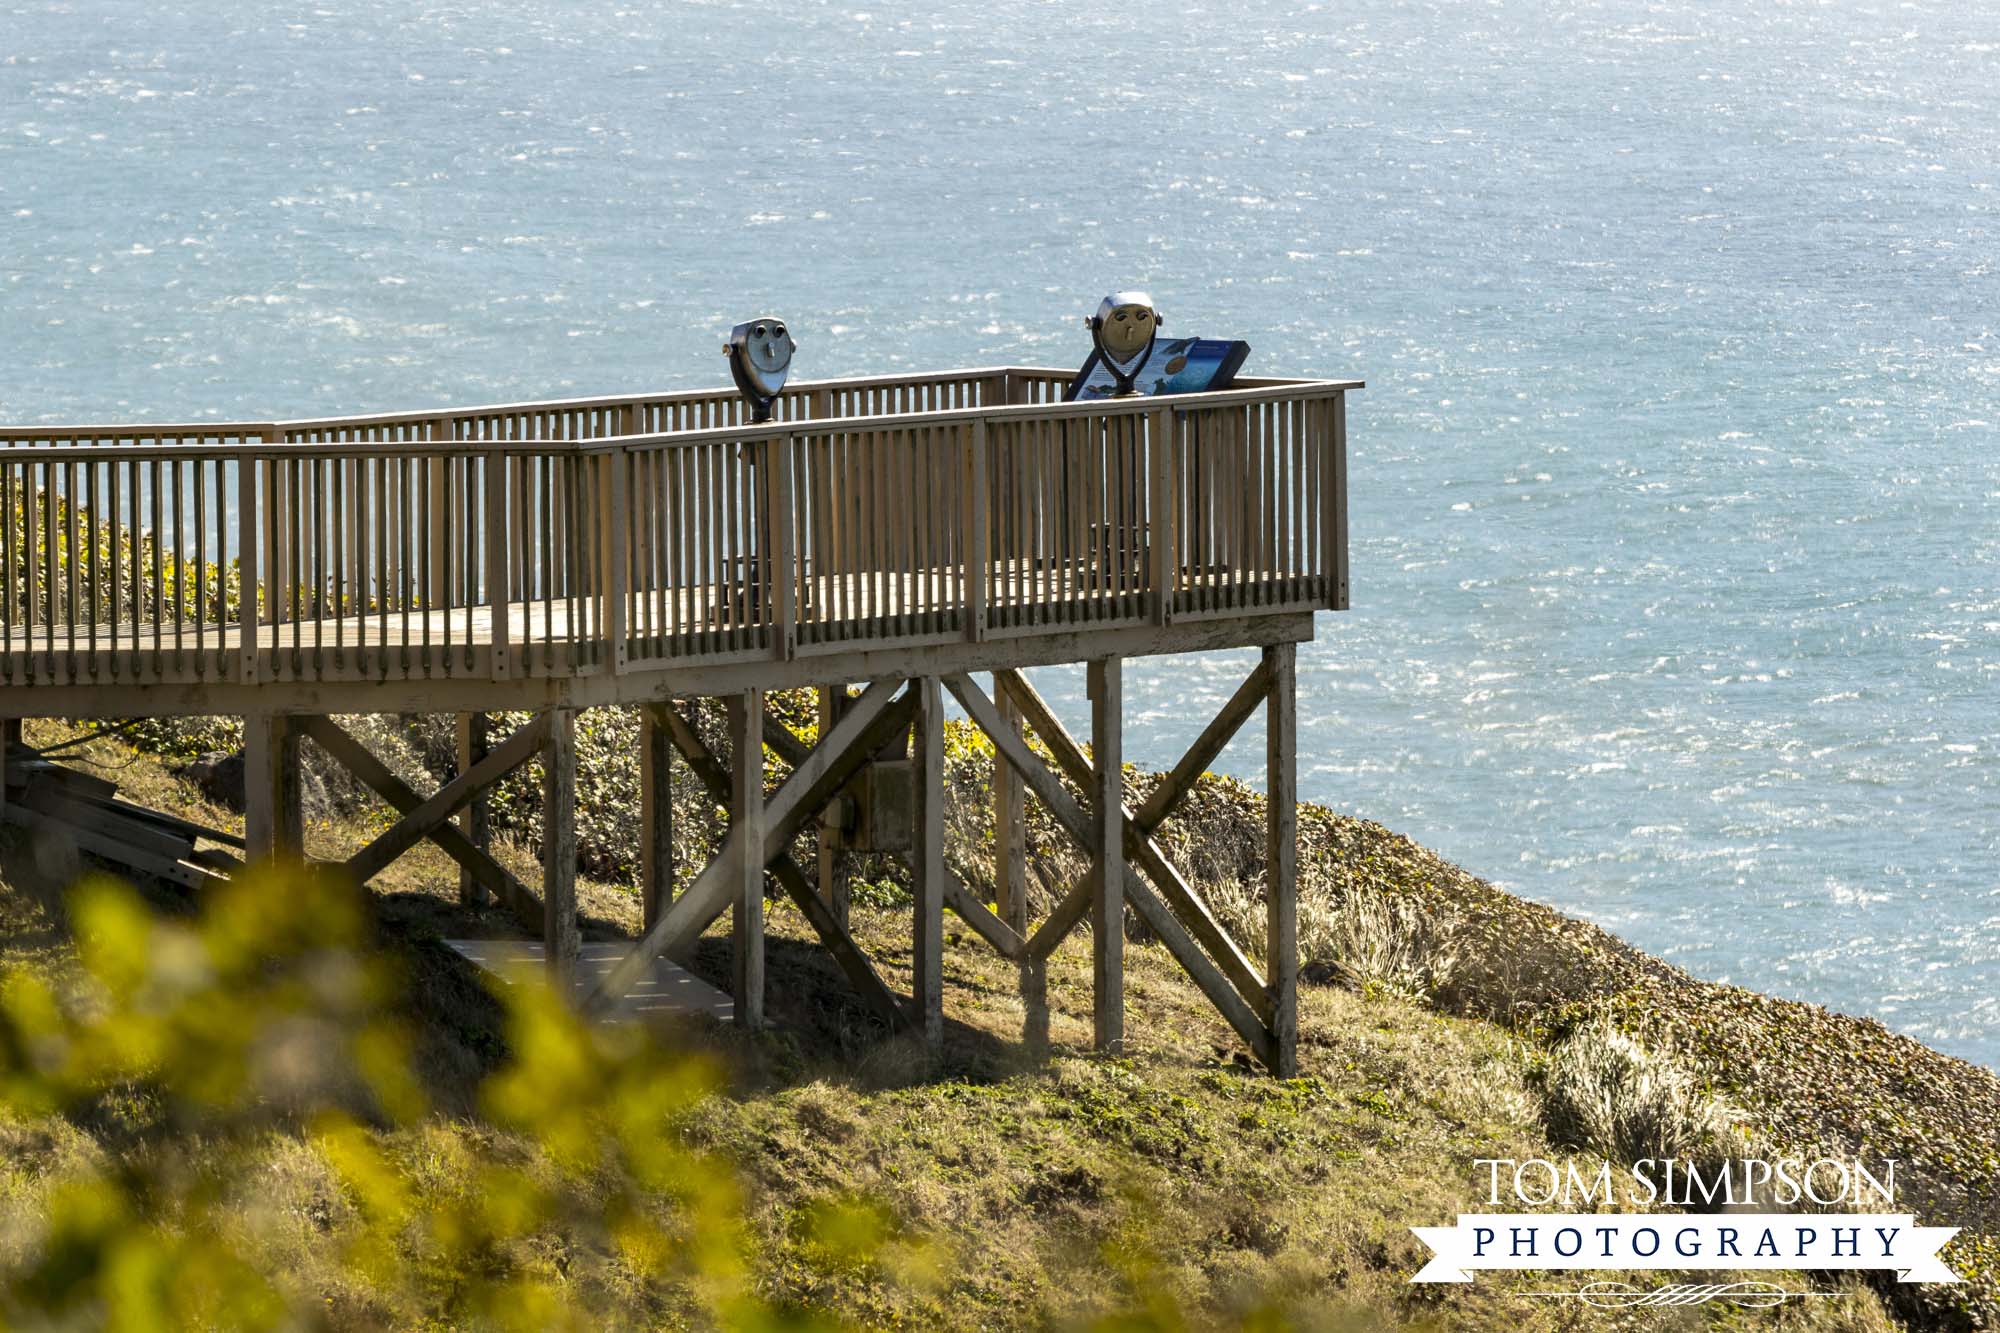 observation deck with viewers at sea lion caves